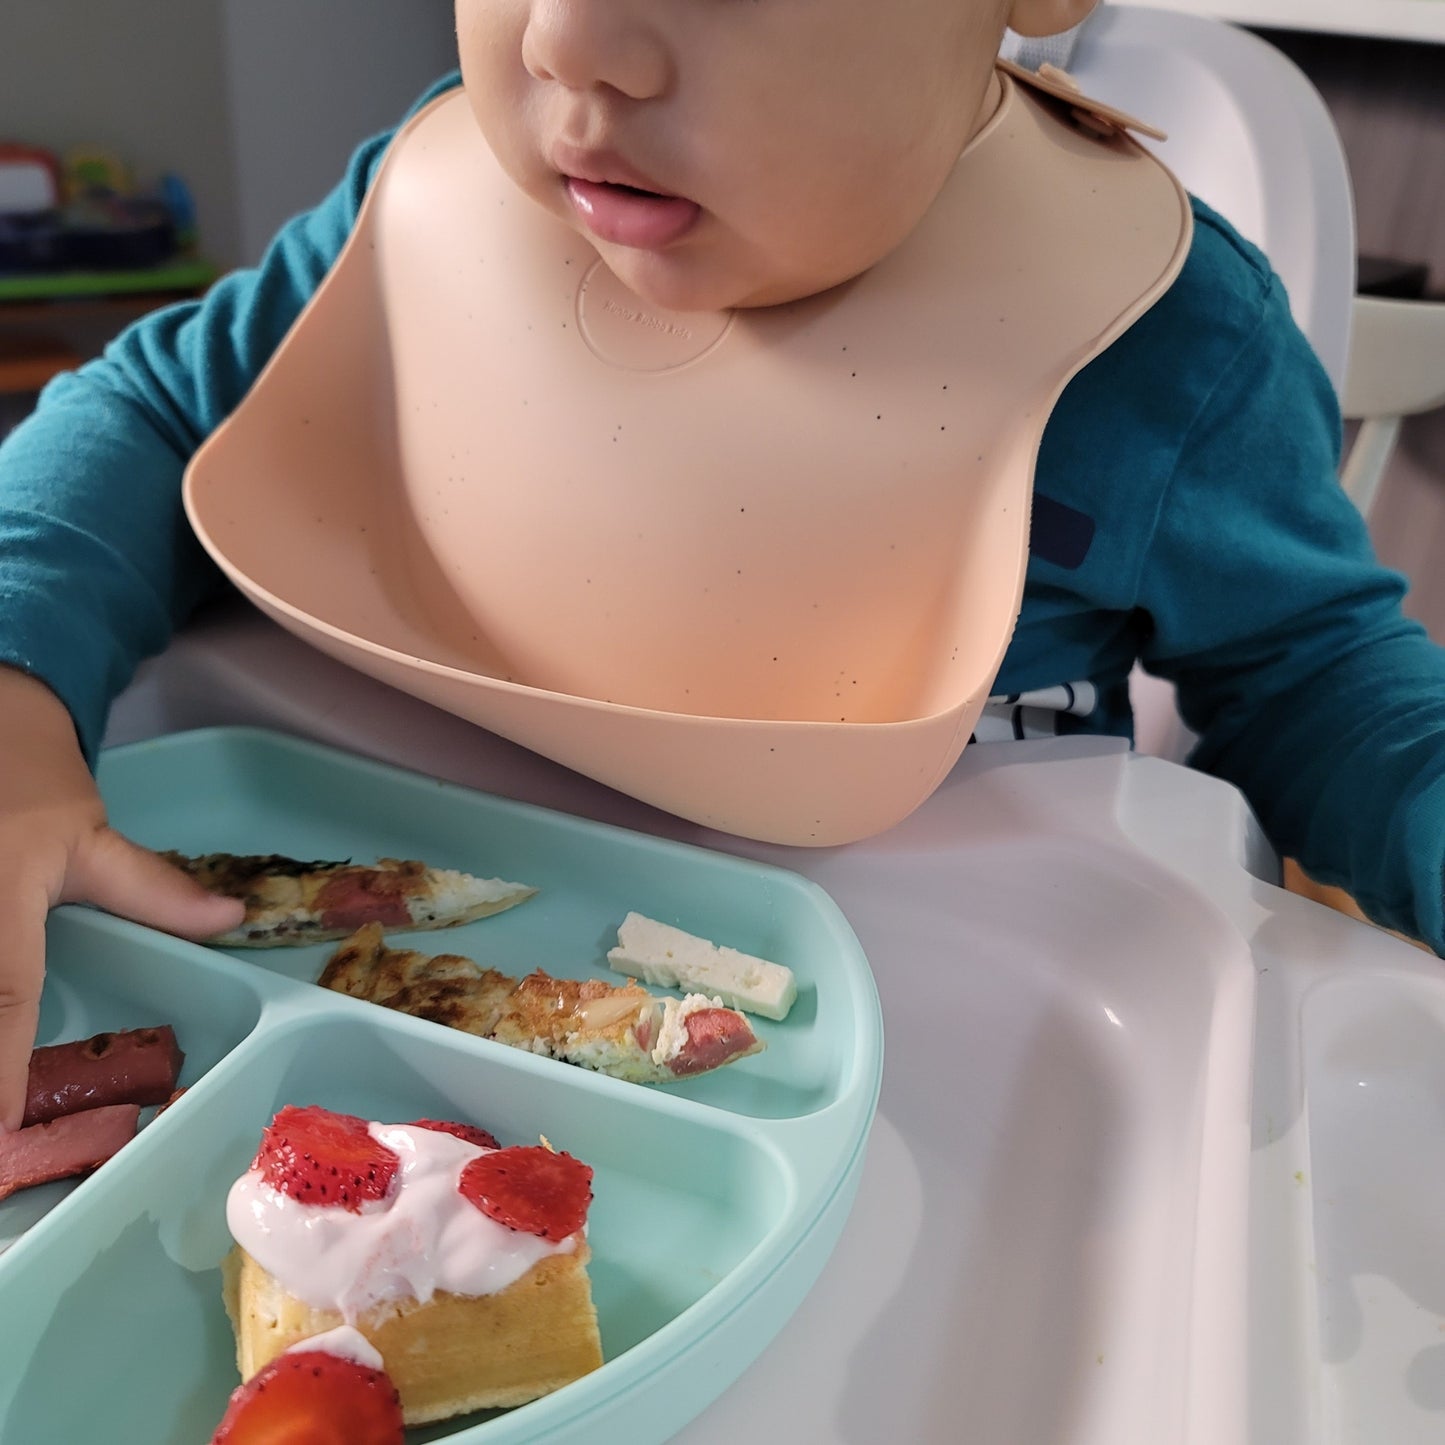 Baby wearing a slicone baby bib| baby bib for meal time | hunny bubba kids baby silicone bib